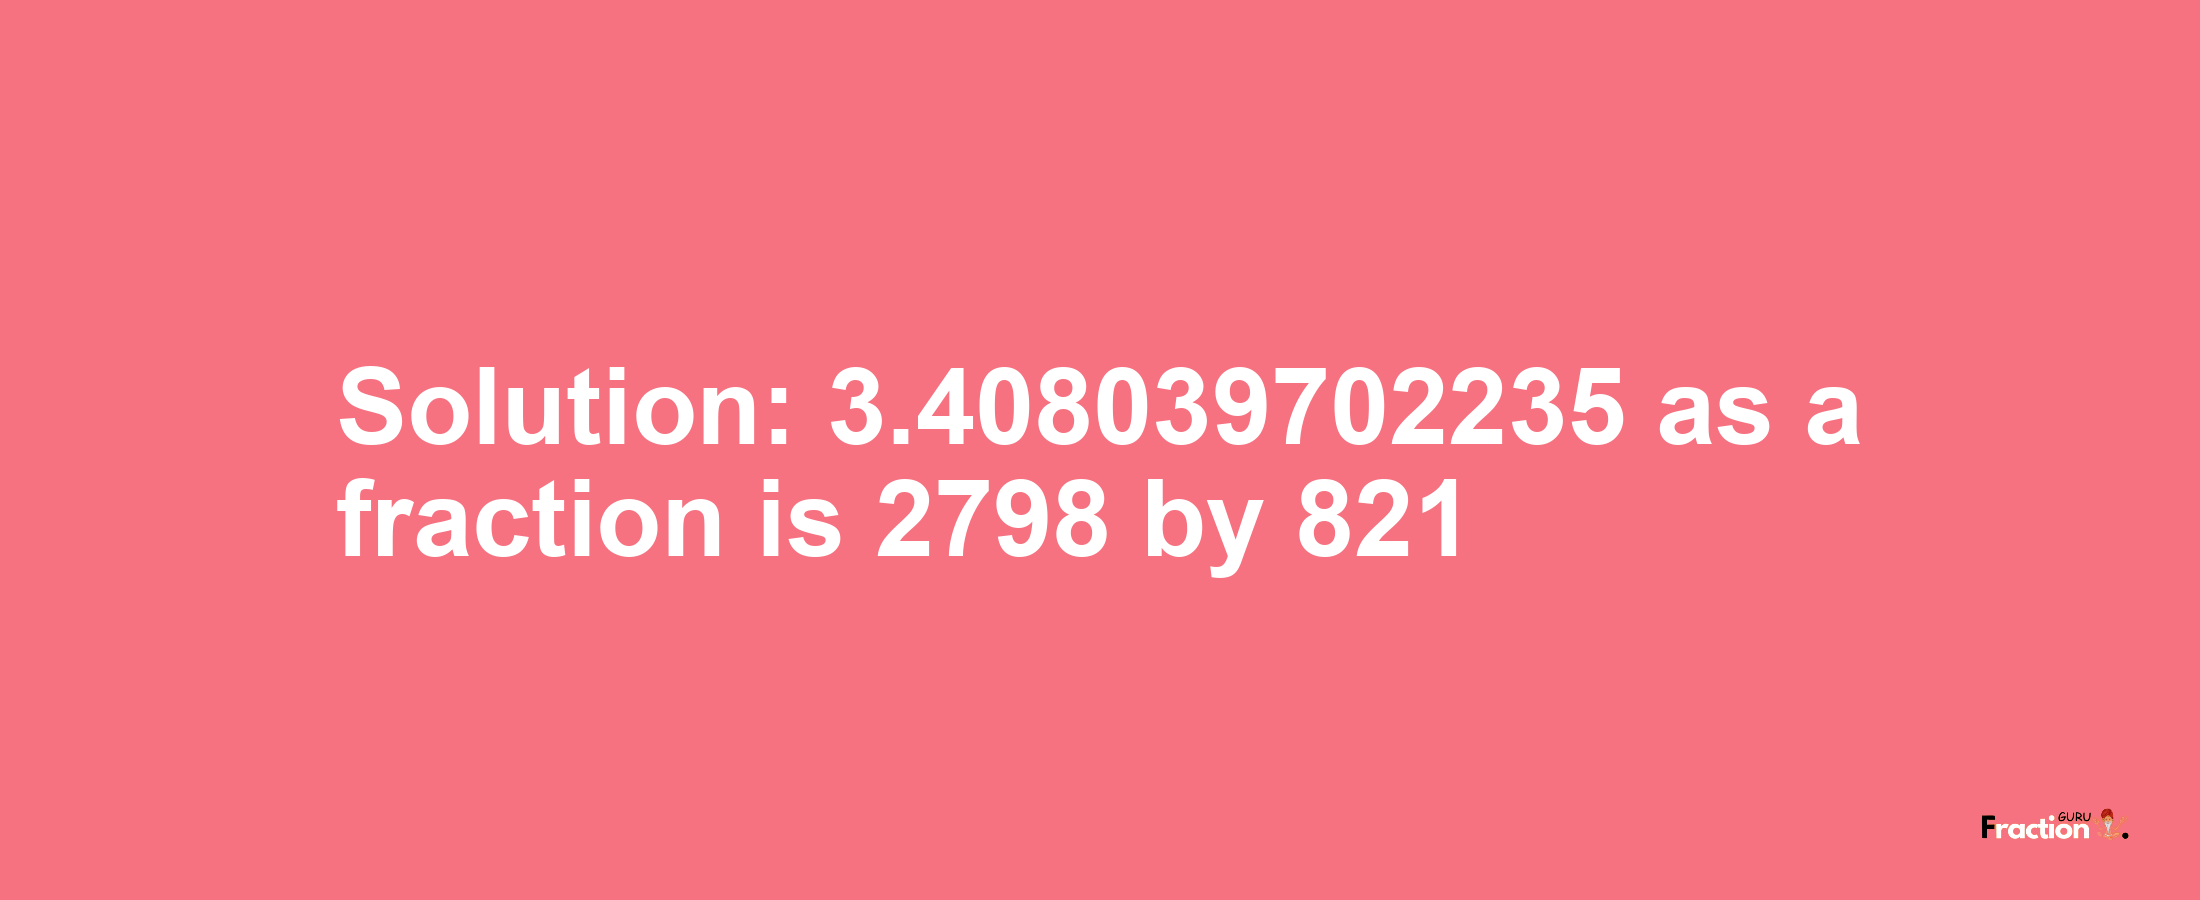 Solution:3.408039702235 as a fraction is 2798/821